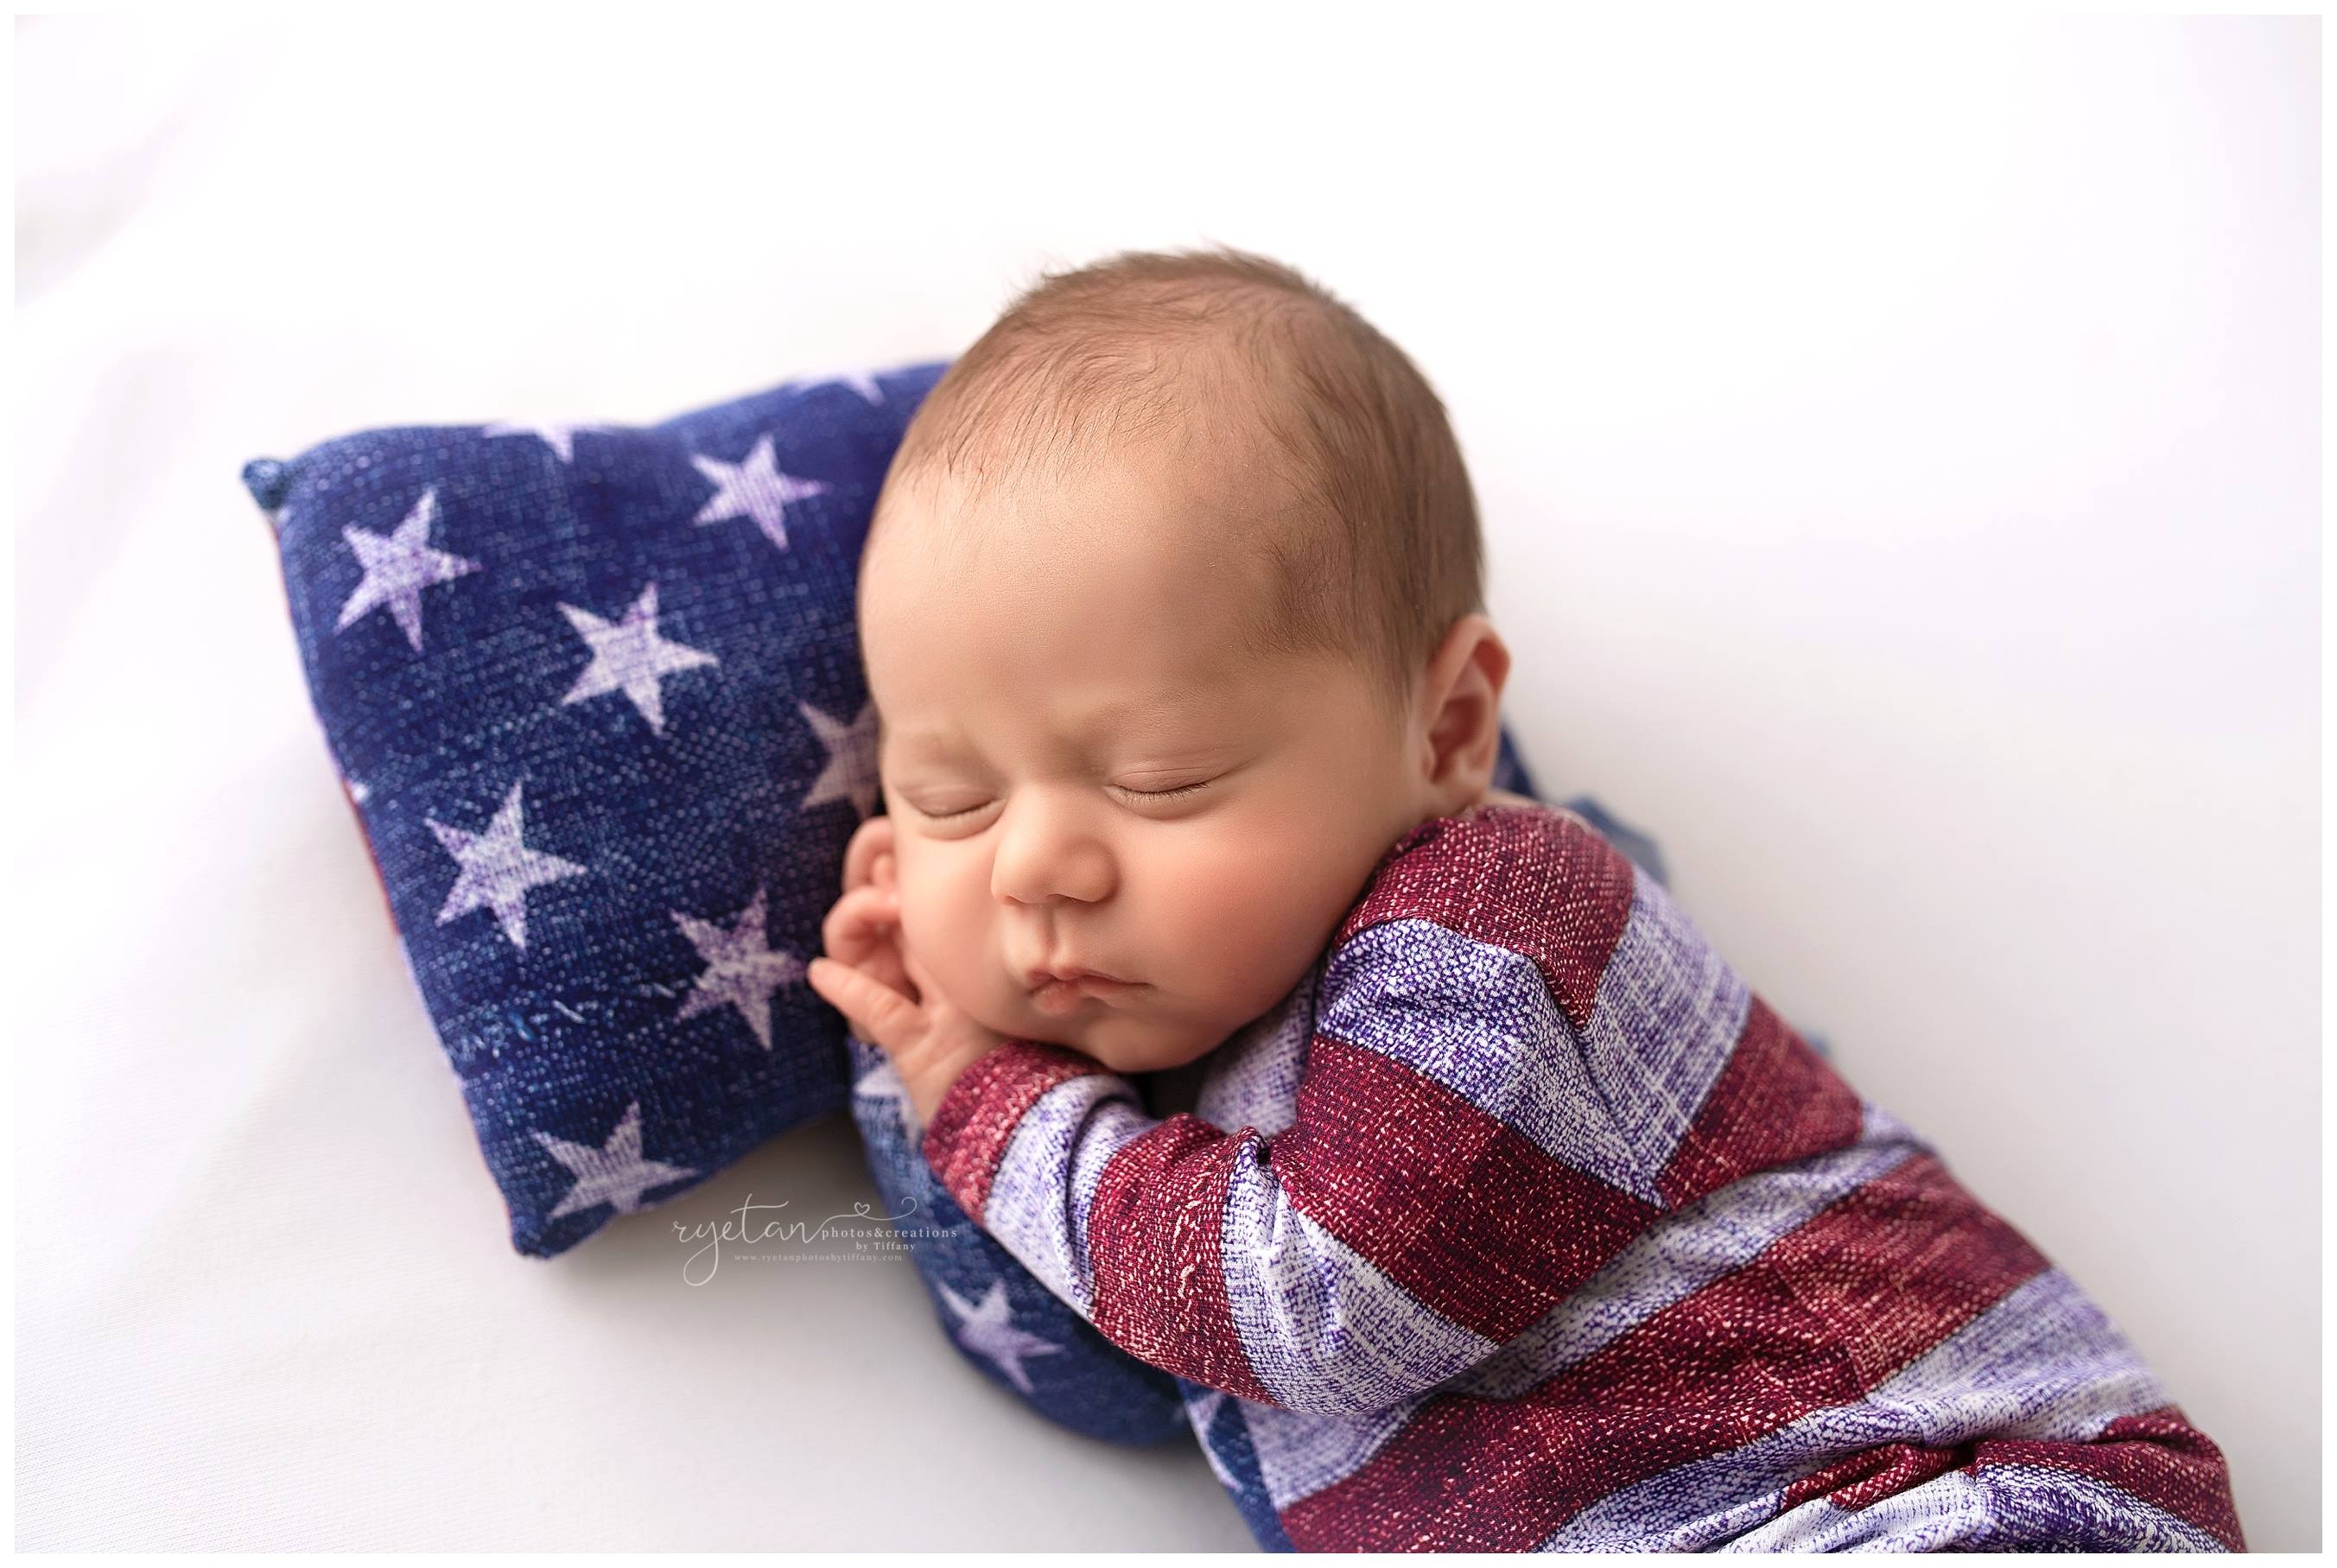 NEW & BRIGHT Stars & Stripes Pillow (9x6)- MADE TO ORDER